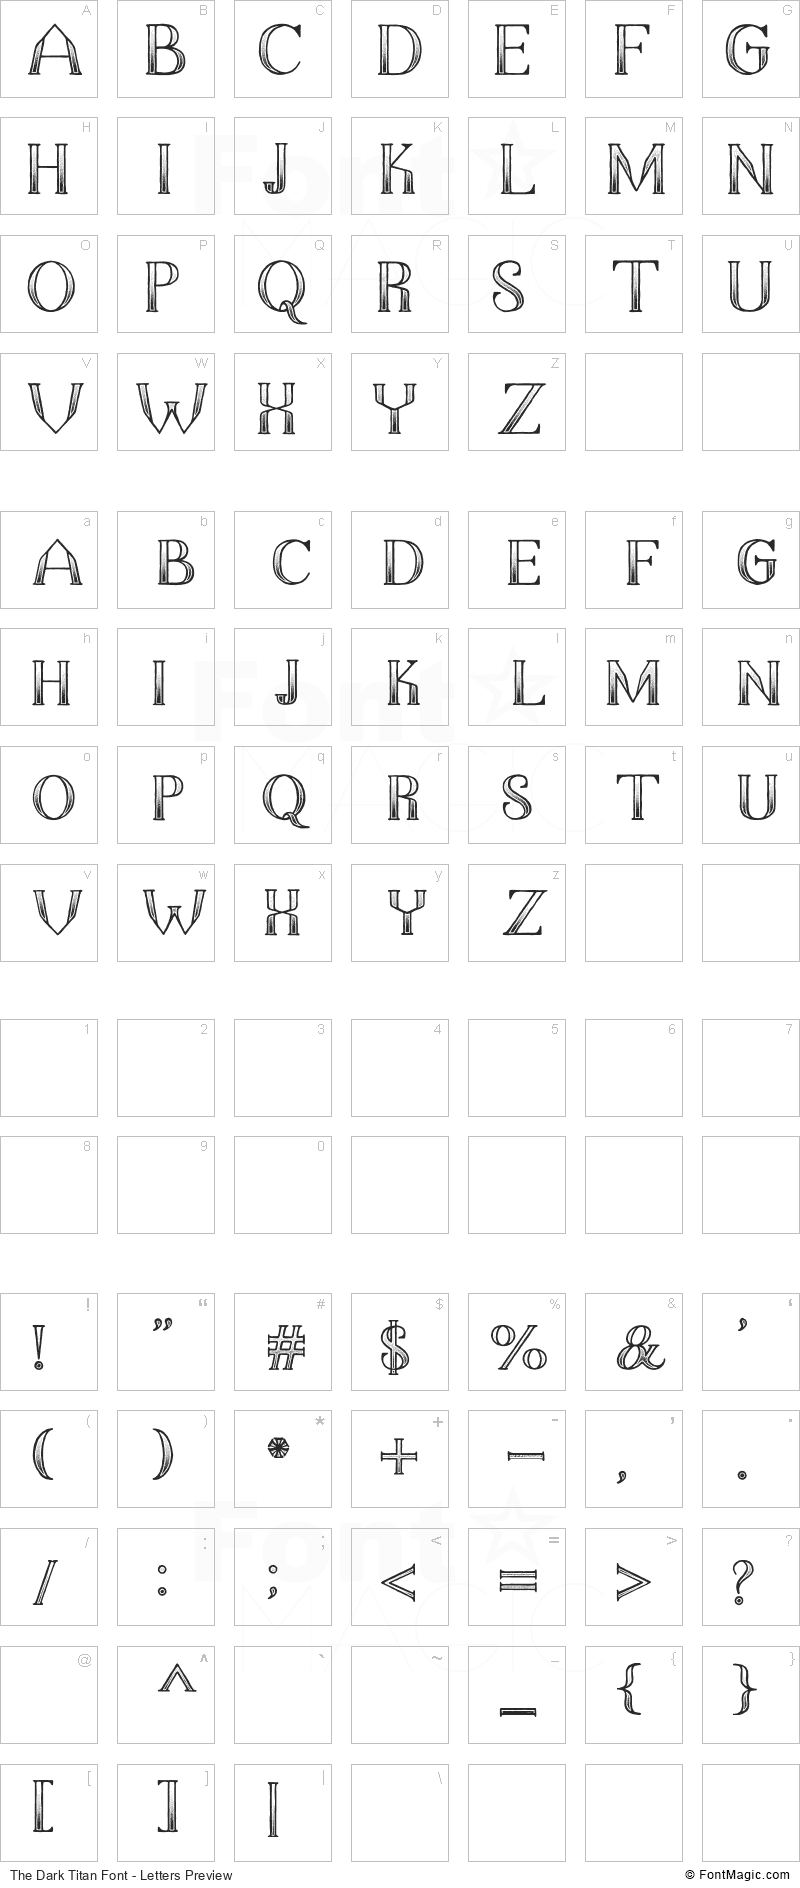 The Dark Titan Font - All Latters Preview Chart